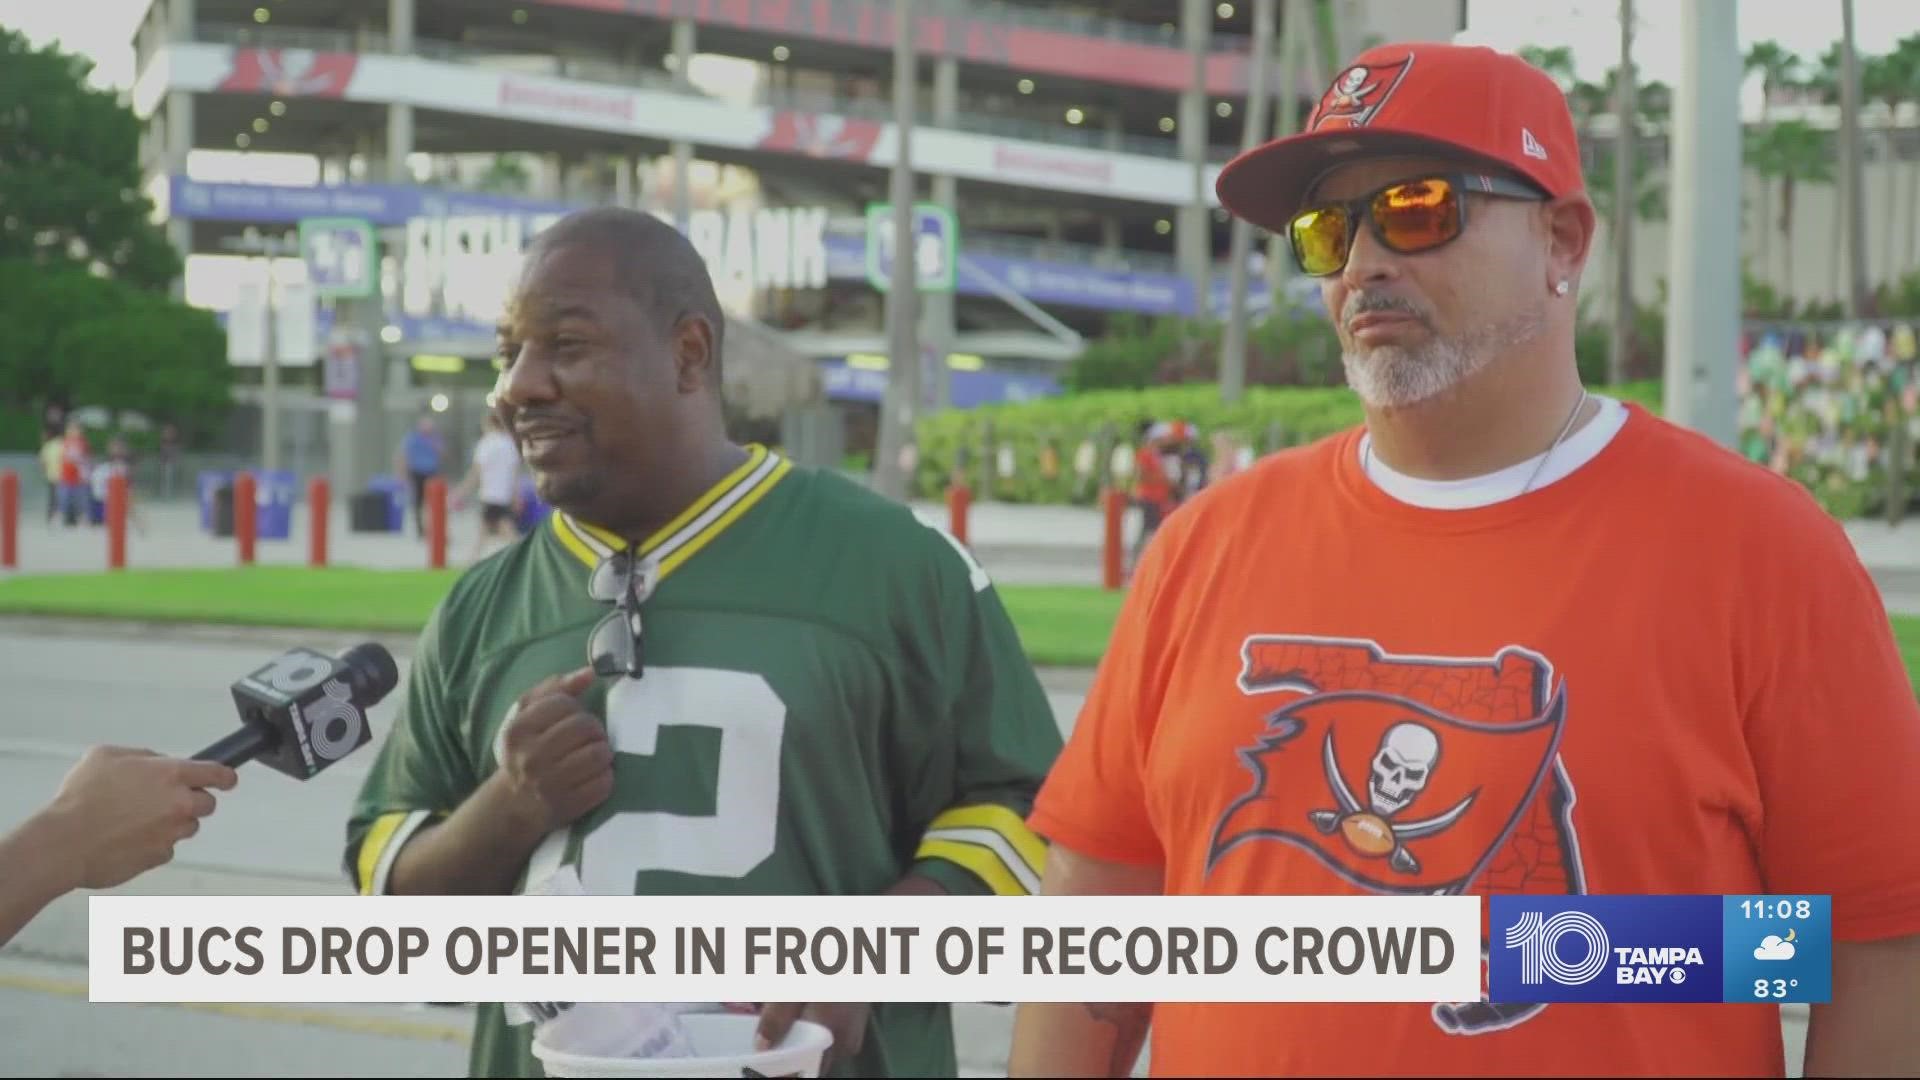 There were reportedly 69,197 people that attended Tampa Bay's game against the Green Bay Packers on Sunday.